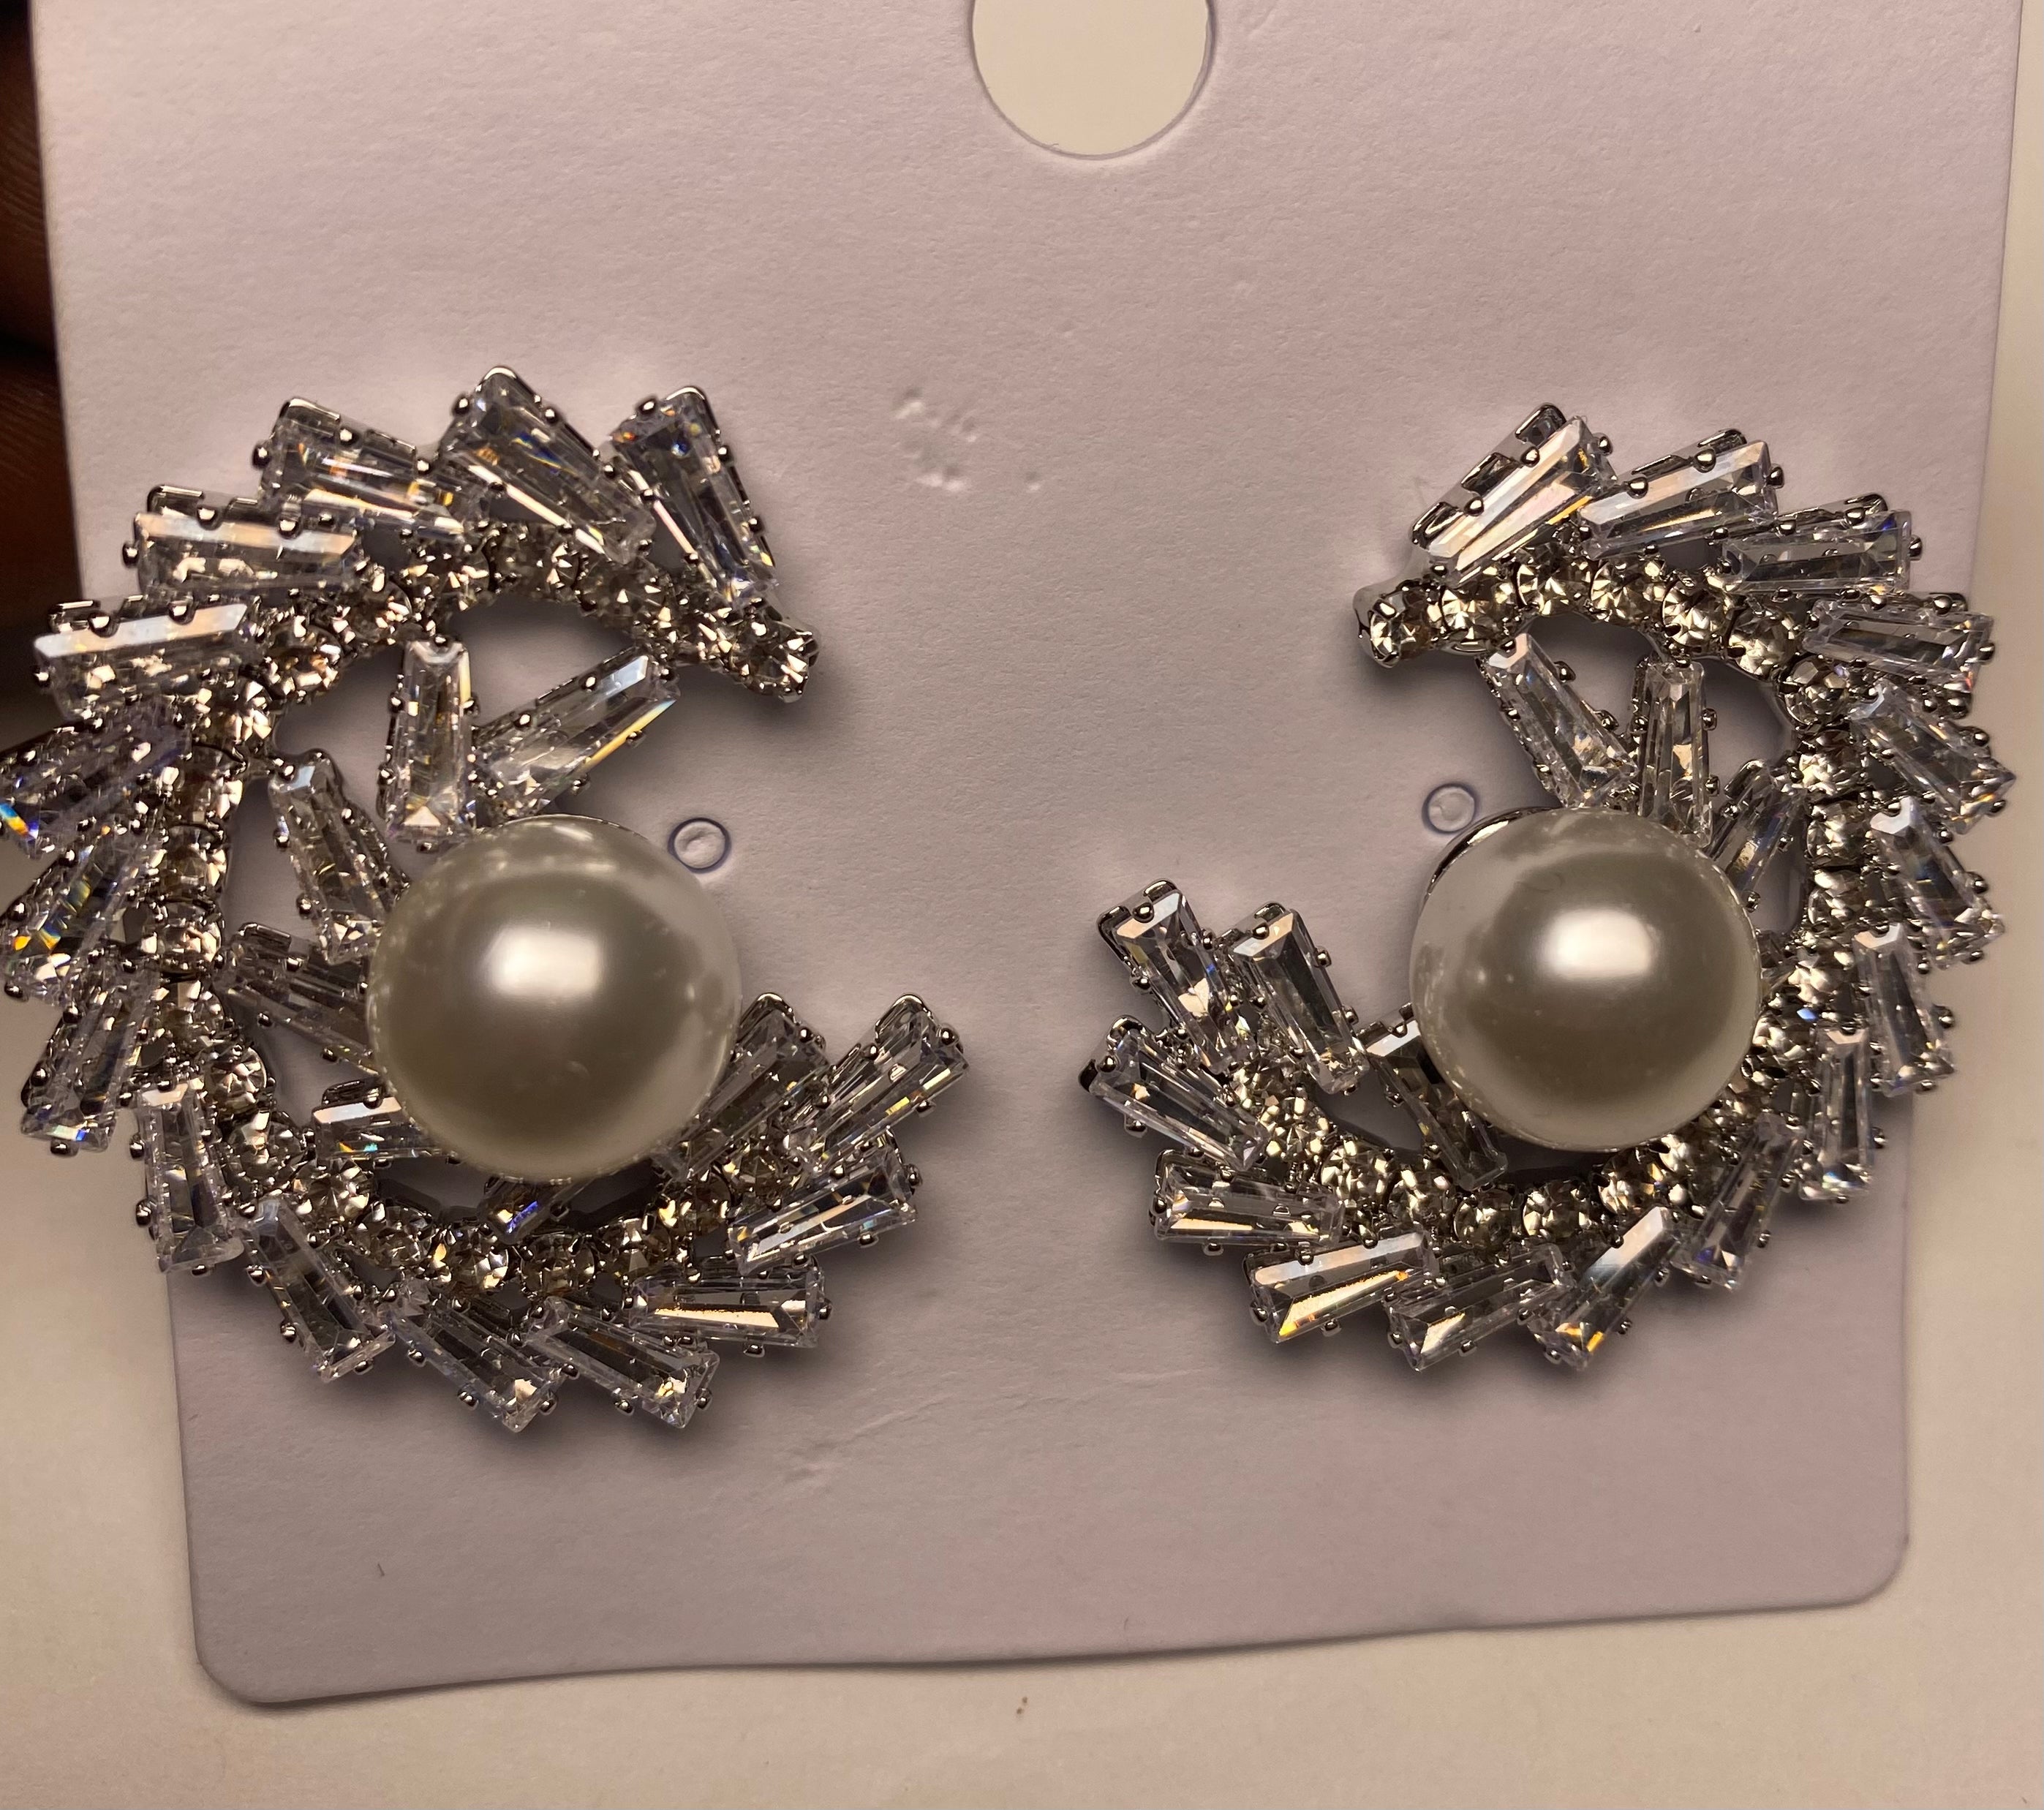 Elegant Silver Crescent shaped Bridal Earrings with Crystals and Pearl